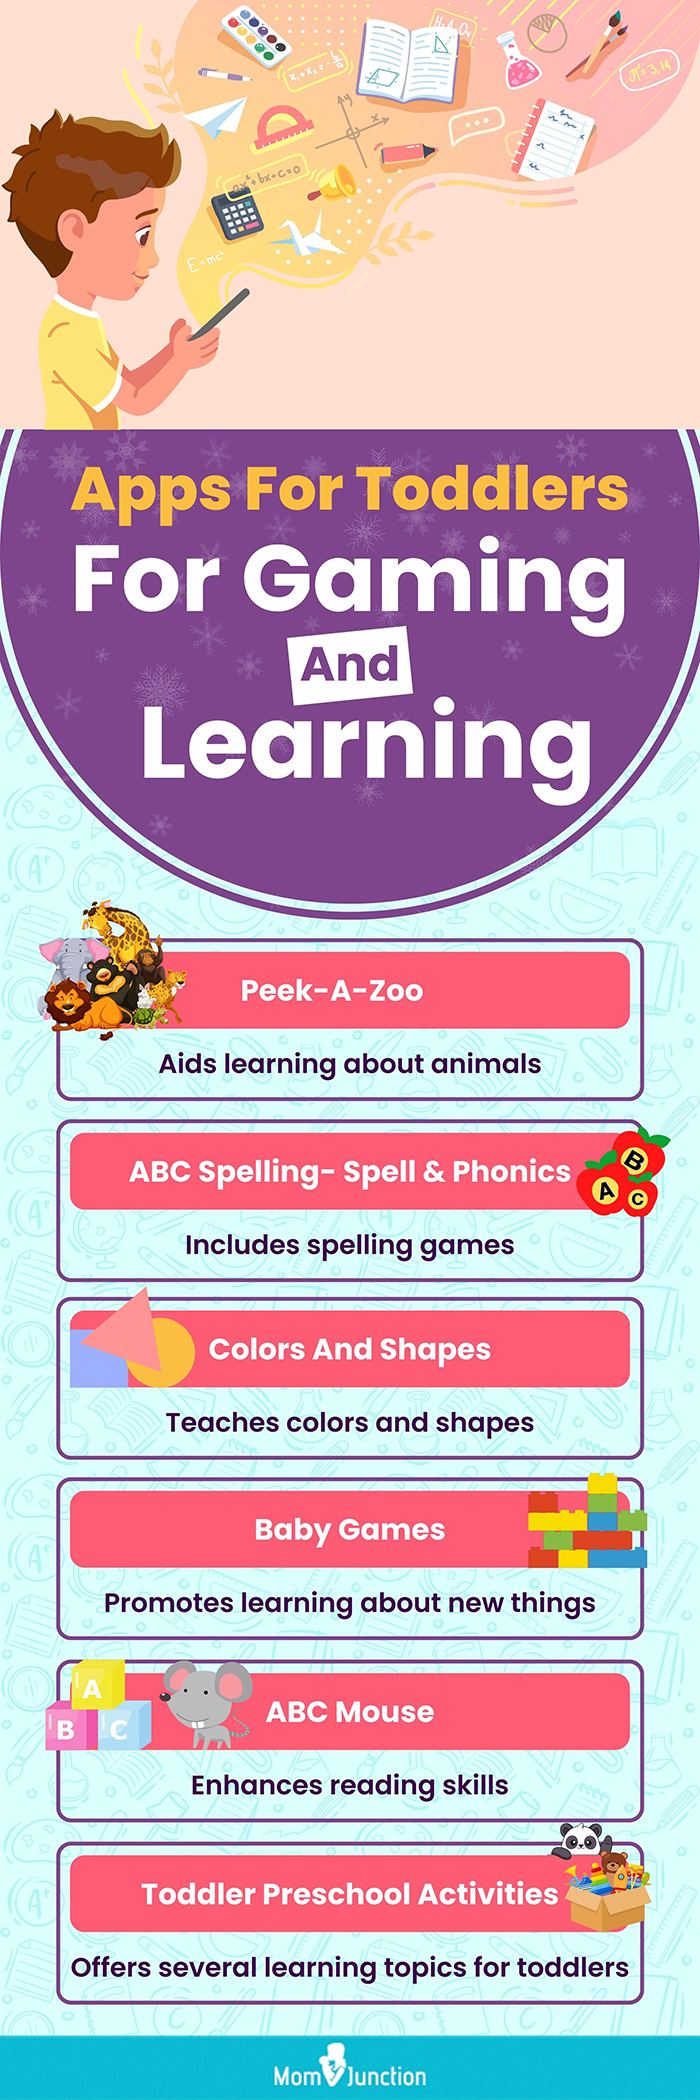 apps for toddlers for gaming and learning (infographic)